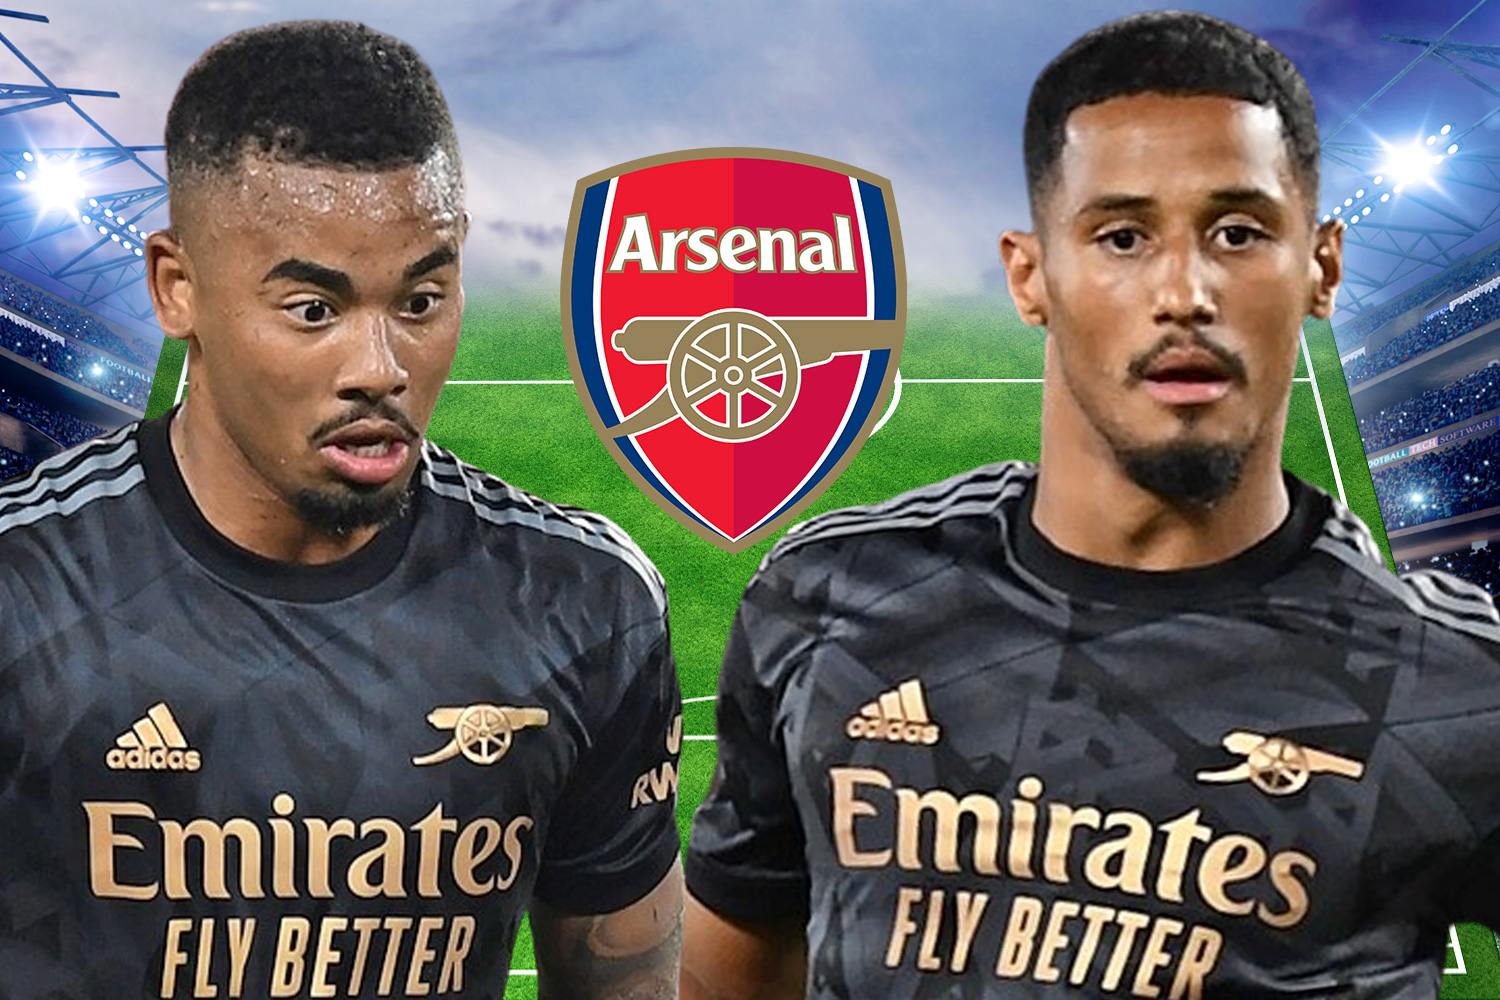 2022/23 EPL: Crystal Palace welcome Arsenal in London first game